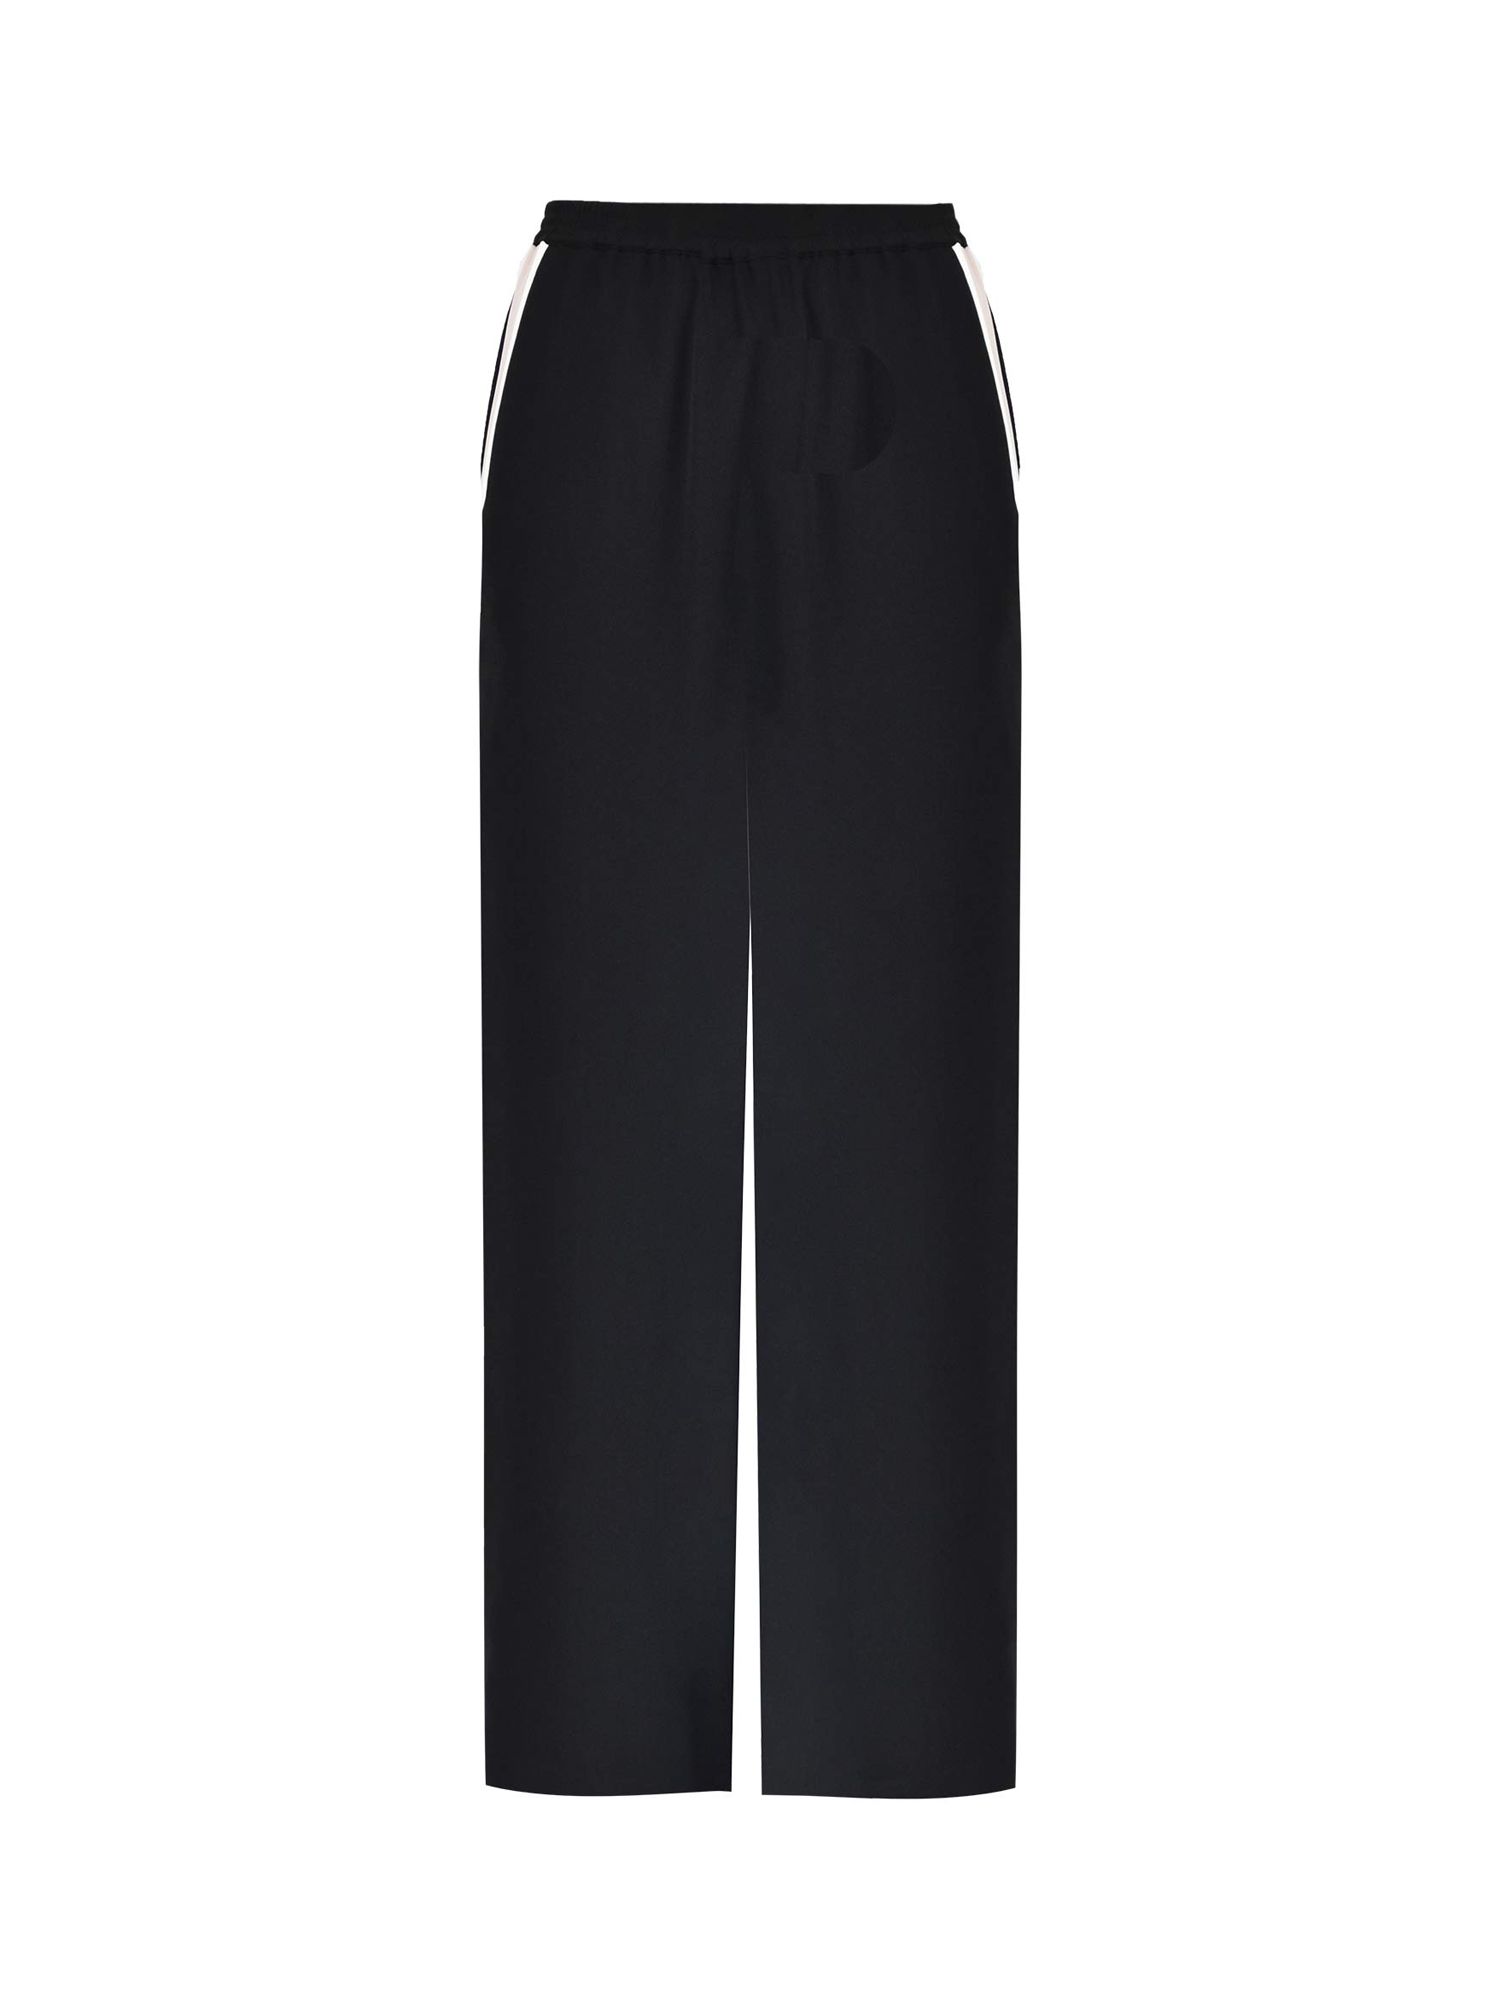 Live Unlimited Curve Side Stripe Trousers, Black at John Lewis & Partners